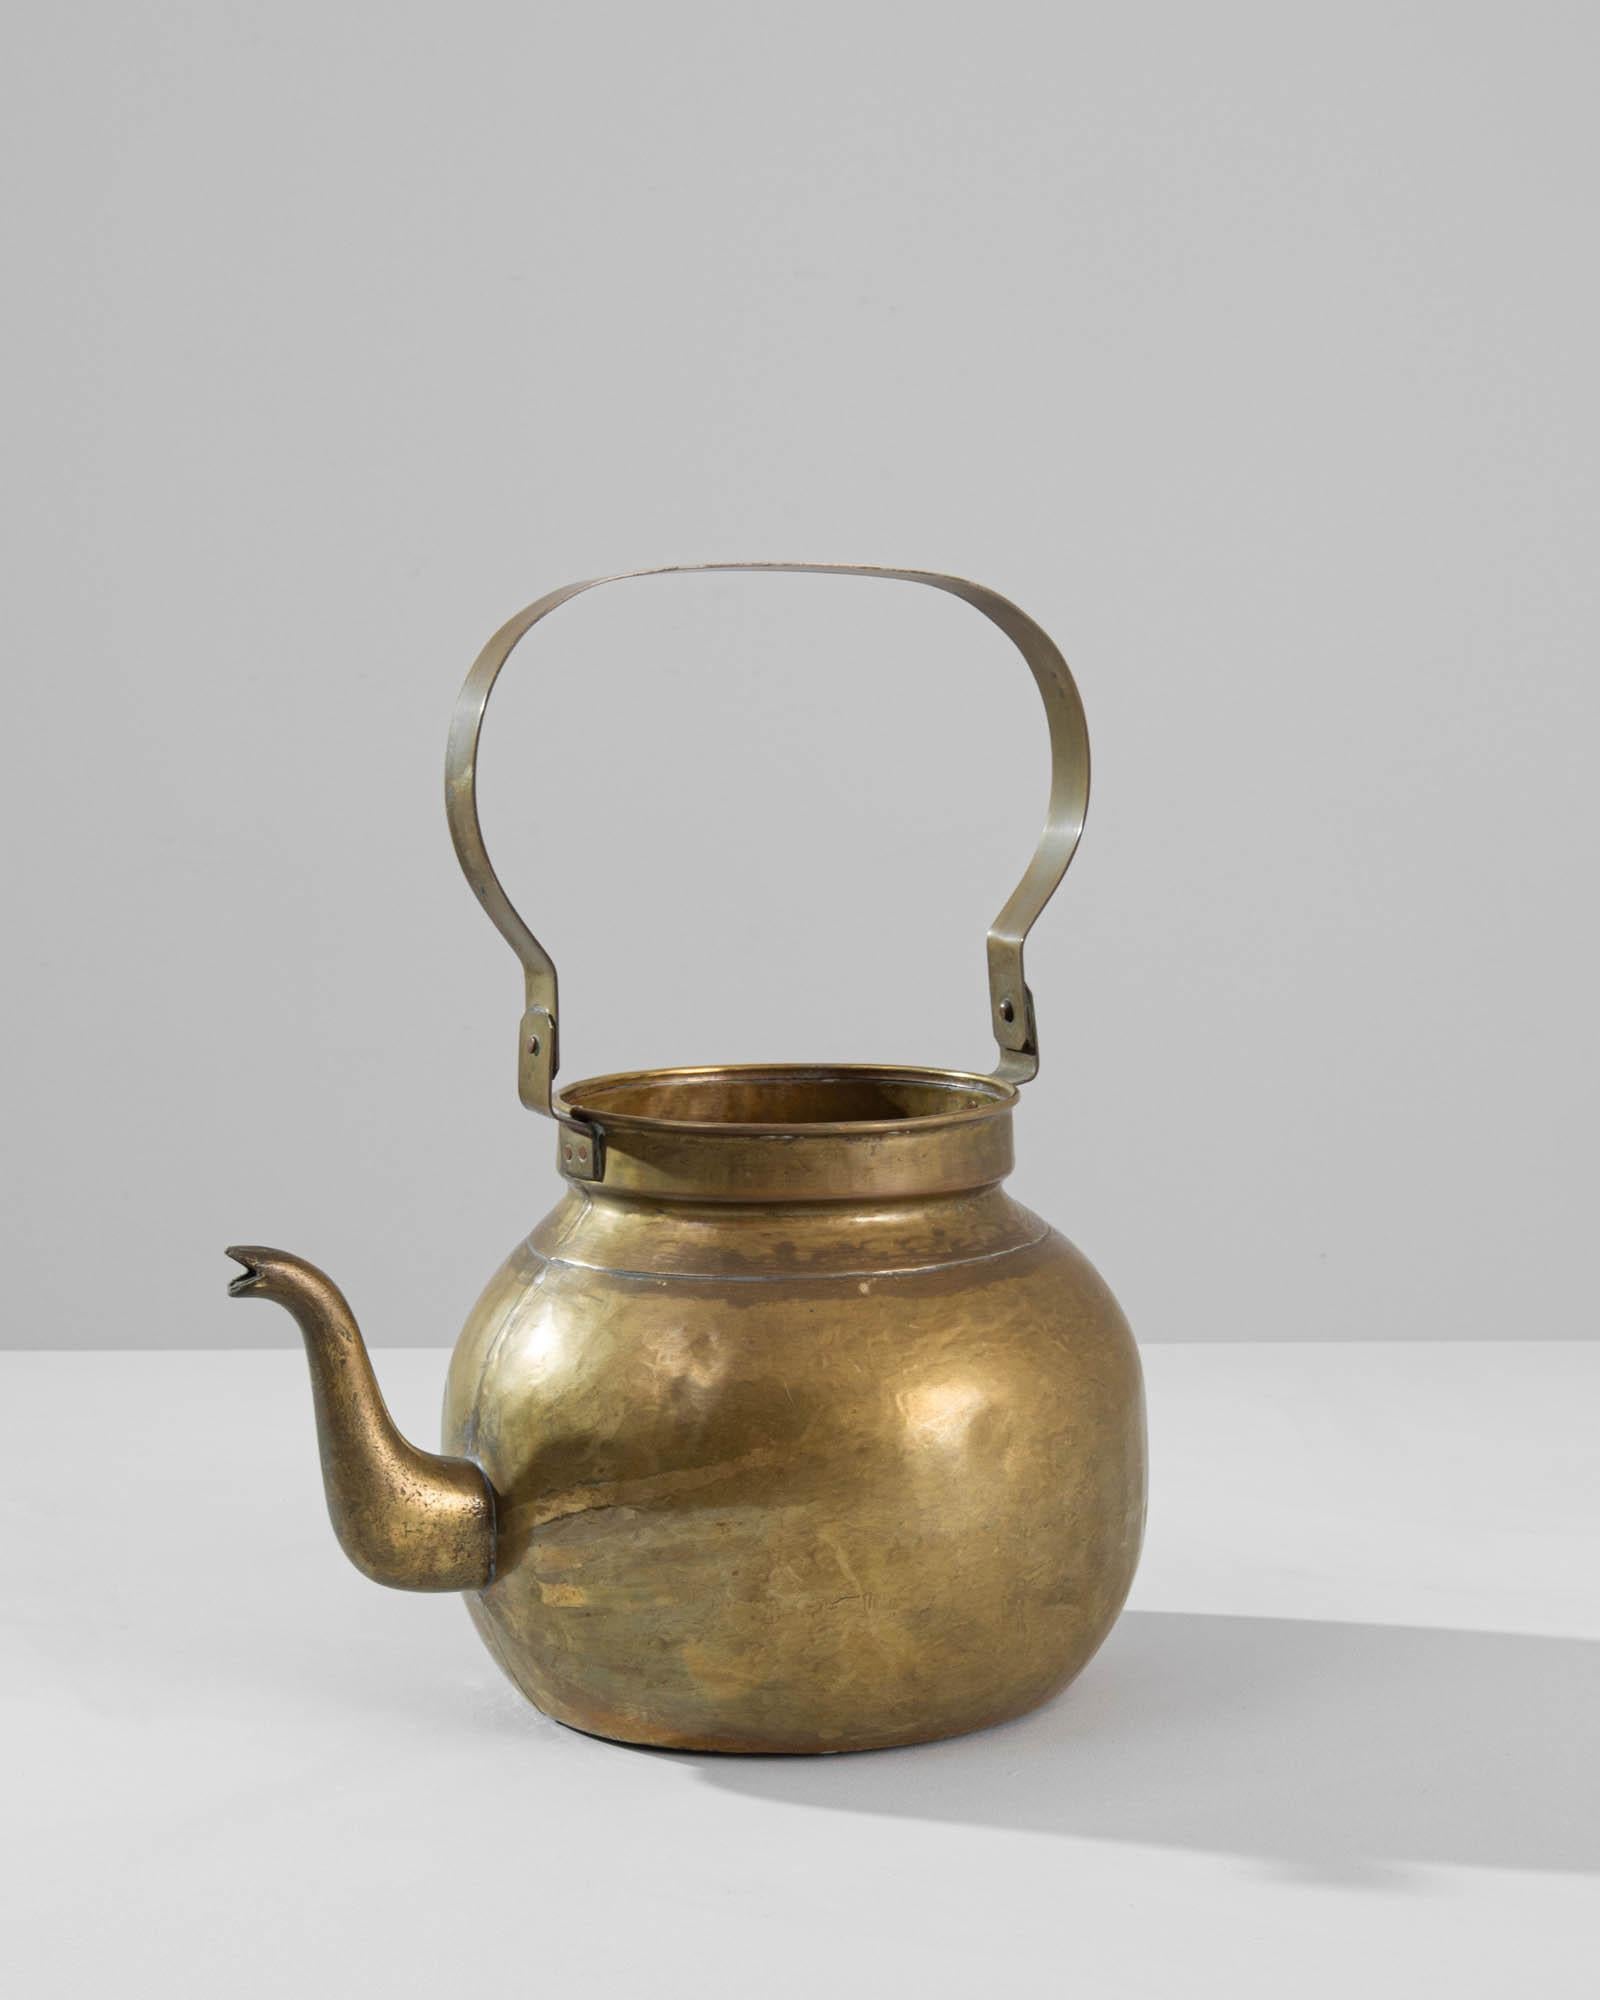 This elegant antique kettle makes a delightful addition to a kitchen. Made in France in the 1800s, the tall handle may once have been used to hang over an open fire. The graceful curvature of the spout lends this pragmatic object an air of